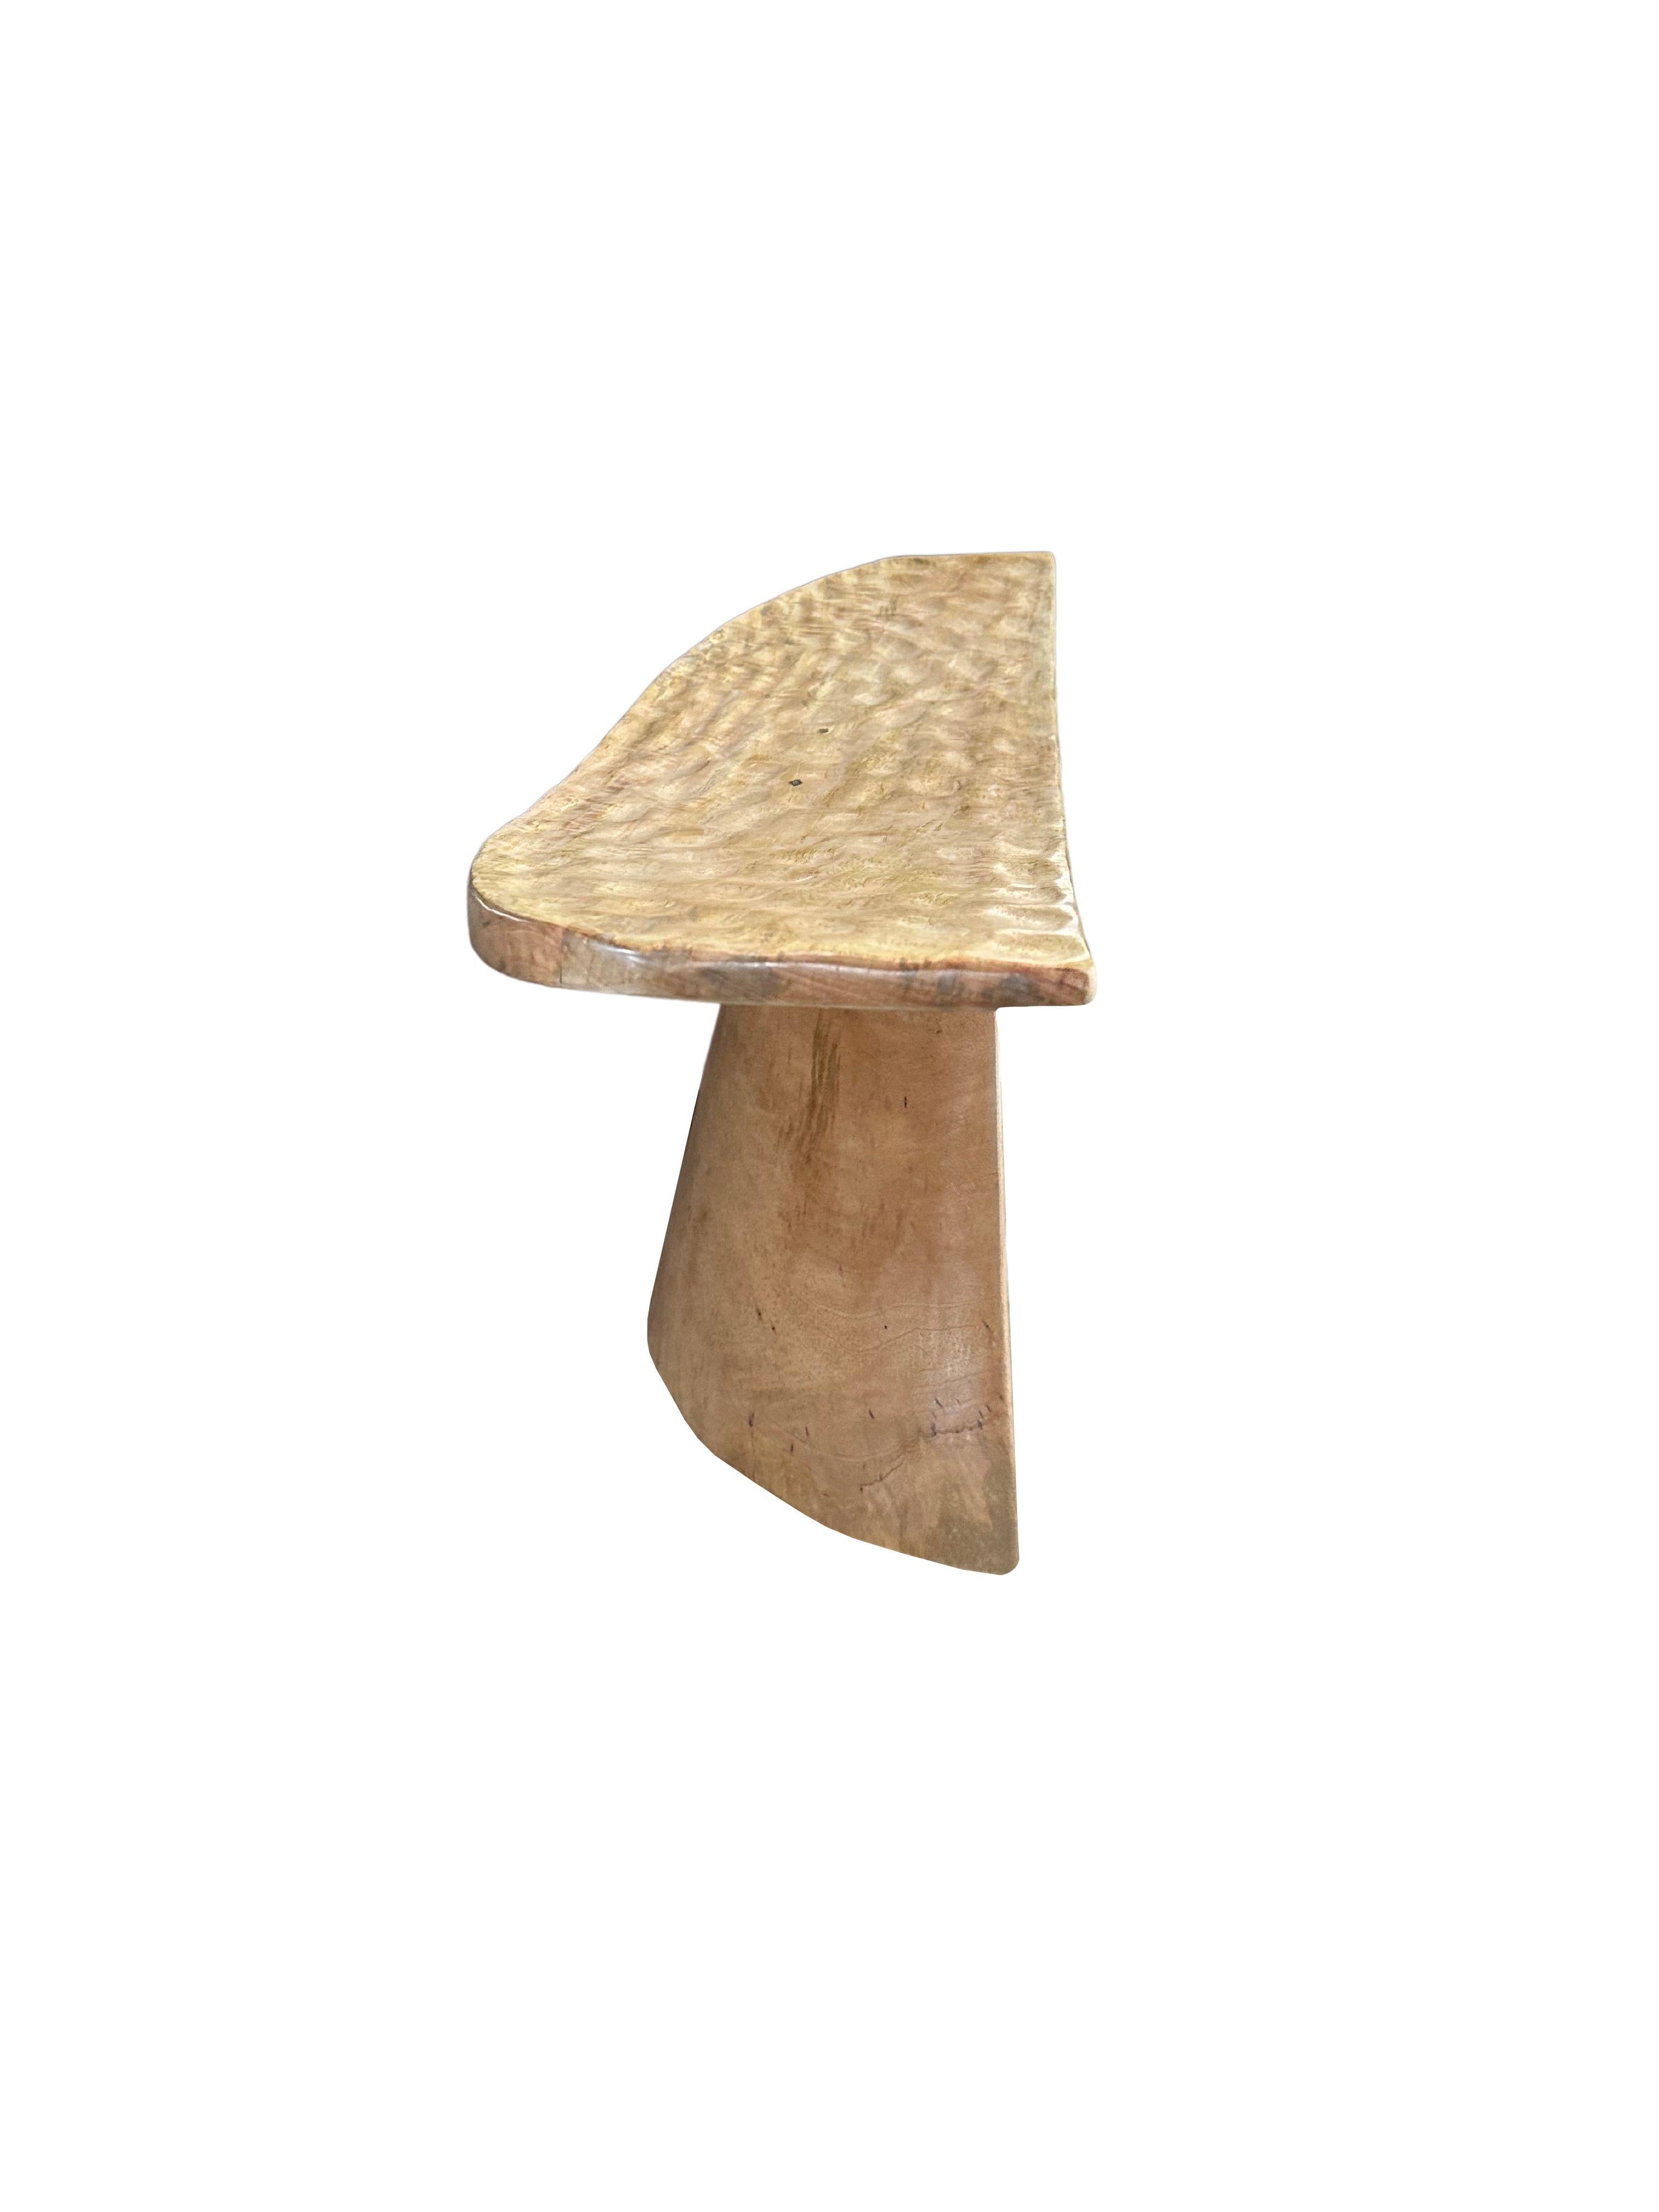 Hand-Crafted Sculptural Stool with Curved Seat & Hand Hewn Detailing, Natural Finish For Sale